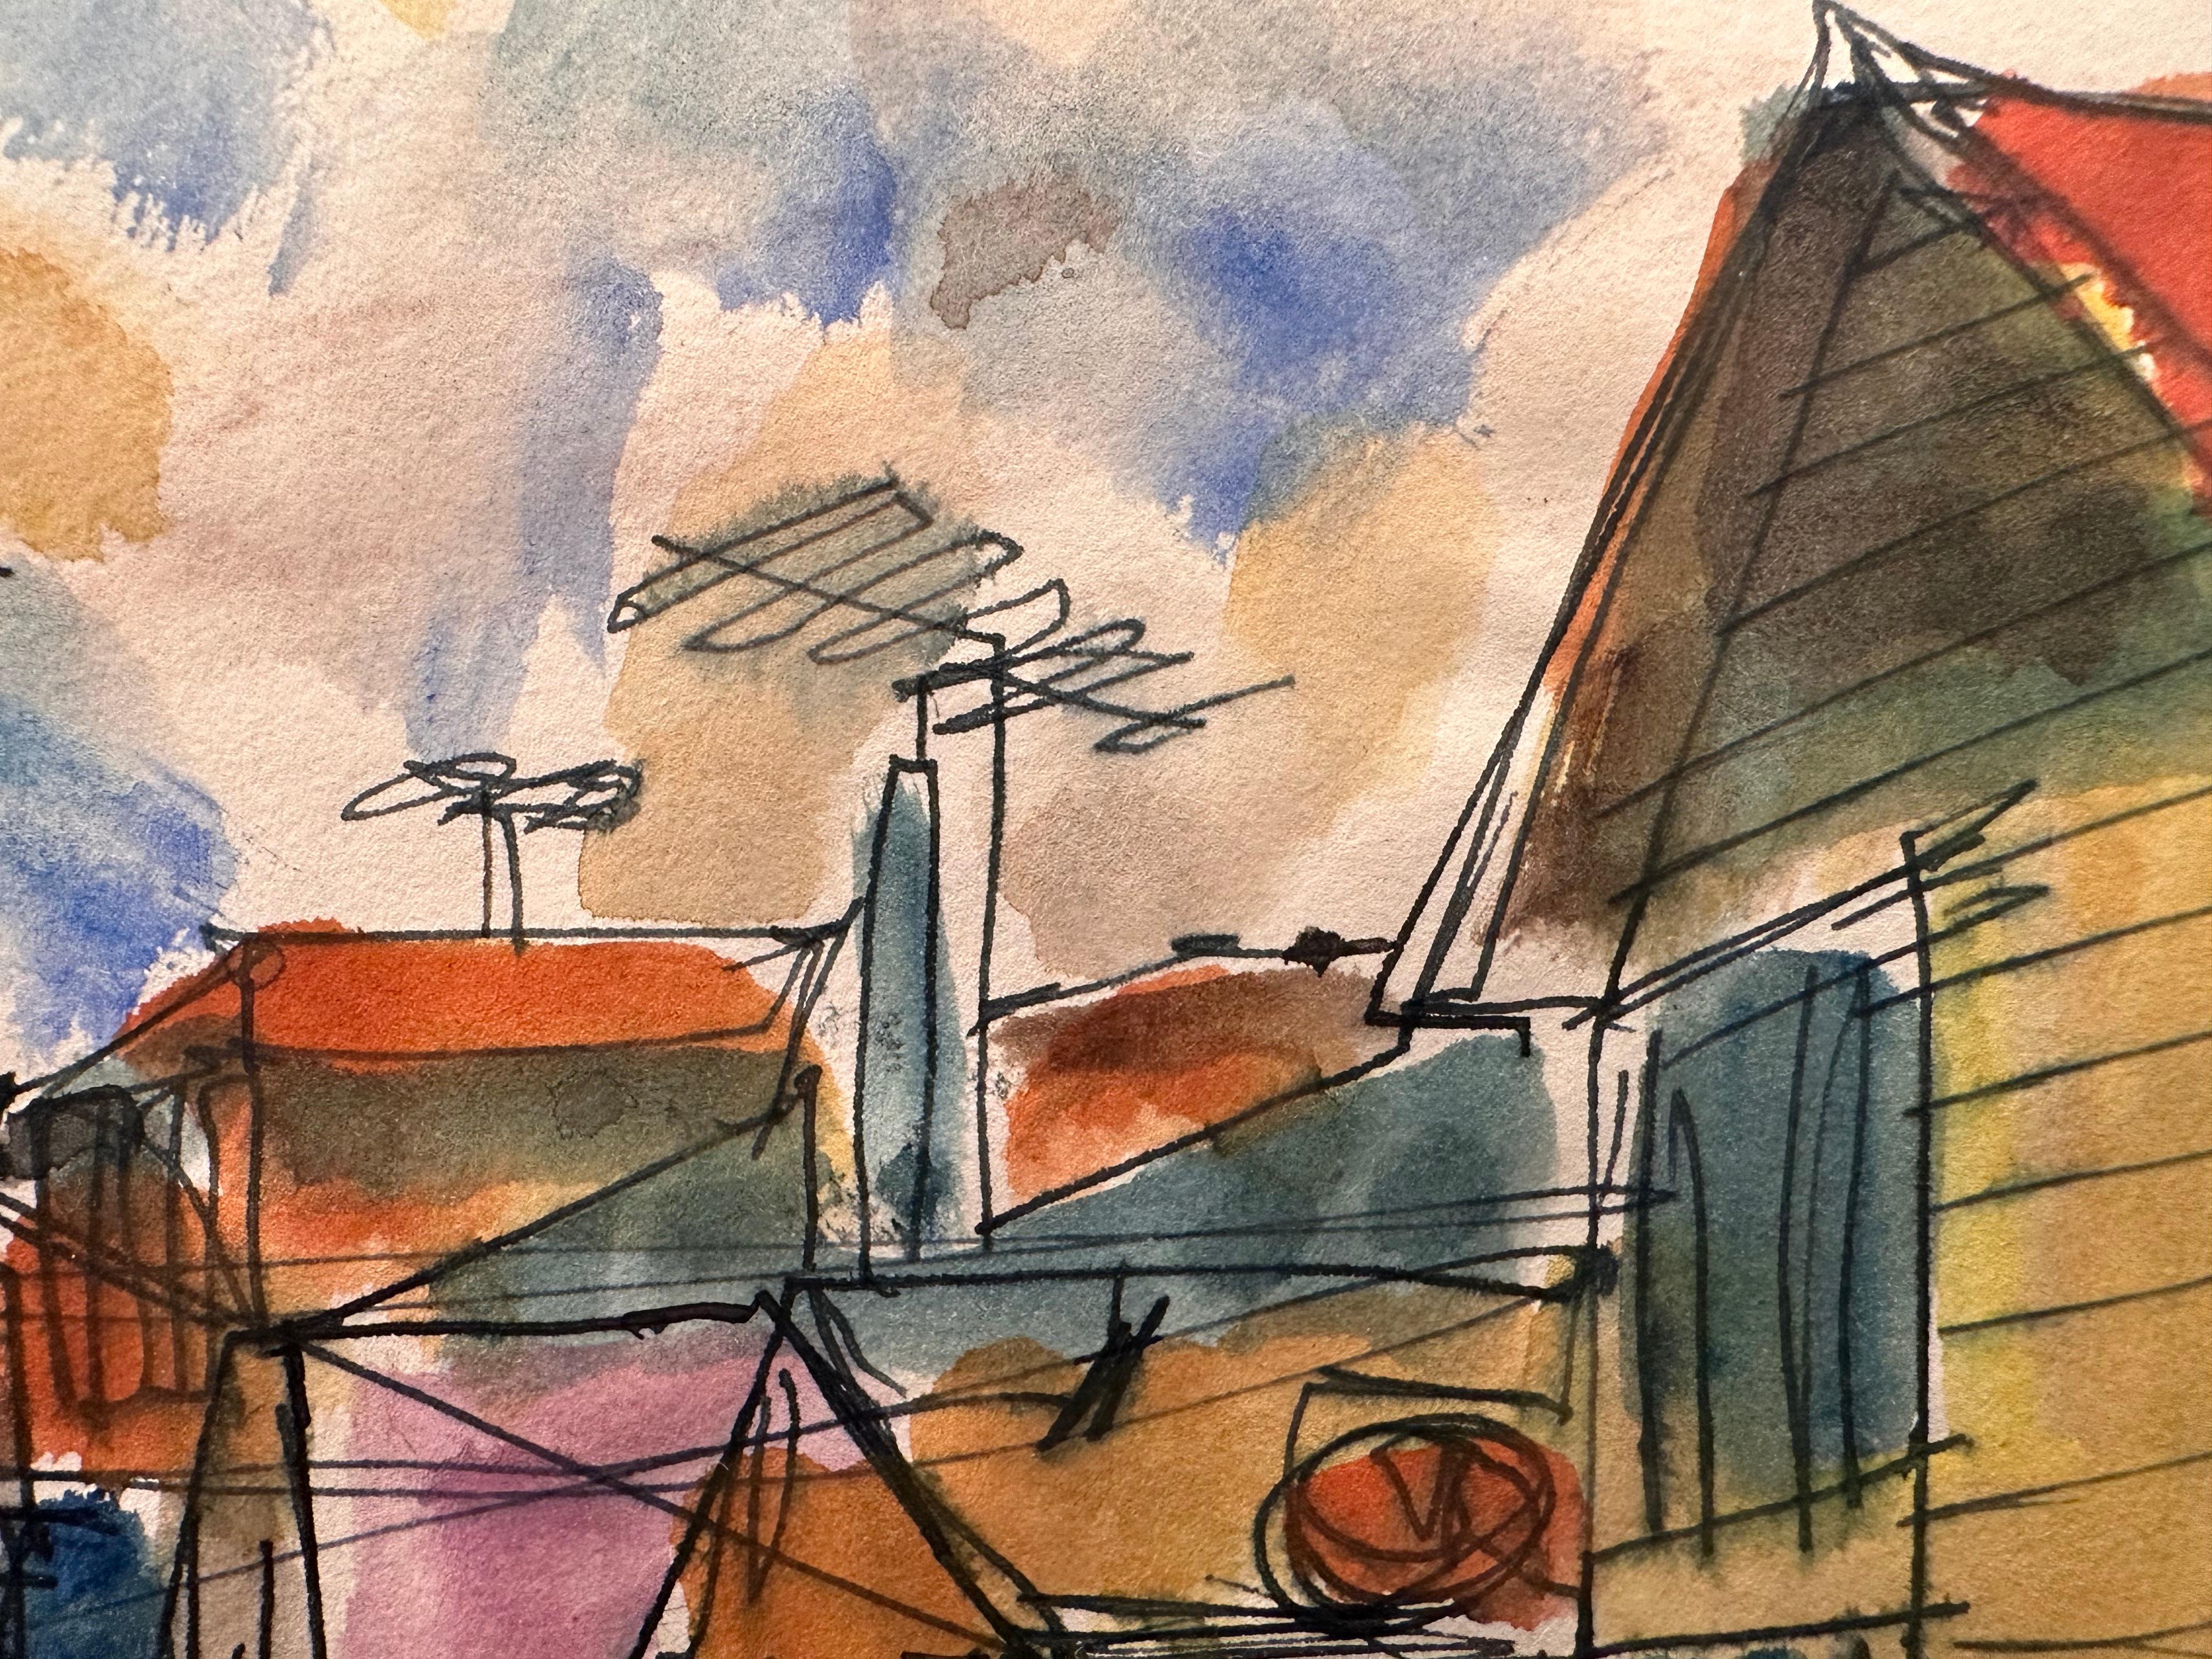 Joseph Kardonne (1911-1985). Boothbay Harbor, Maine, 1967. Watercolor on paper, sheet measures 8.5 x 11 inches. Signed, dated and titled lower center. Excellent condition. Unframed. 

Born in Newark, New Jersey in 1911, Joe Kardonne first showed an